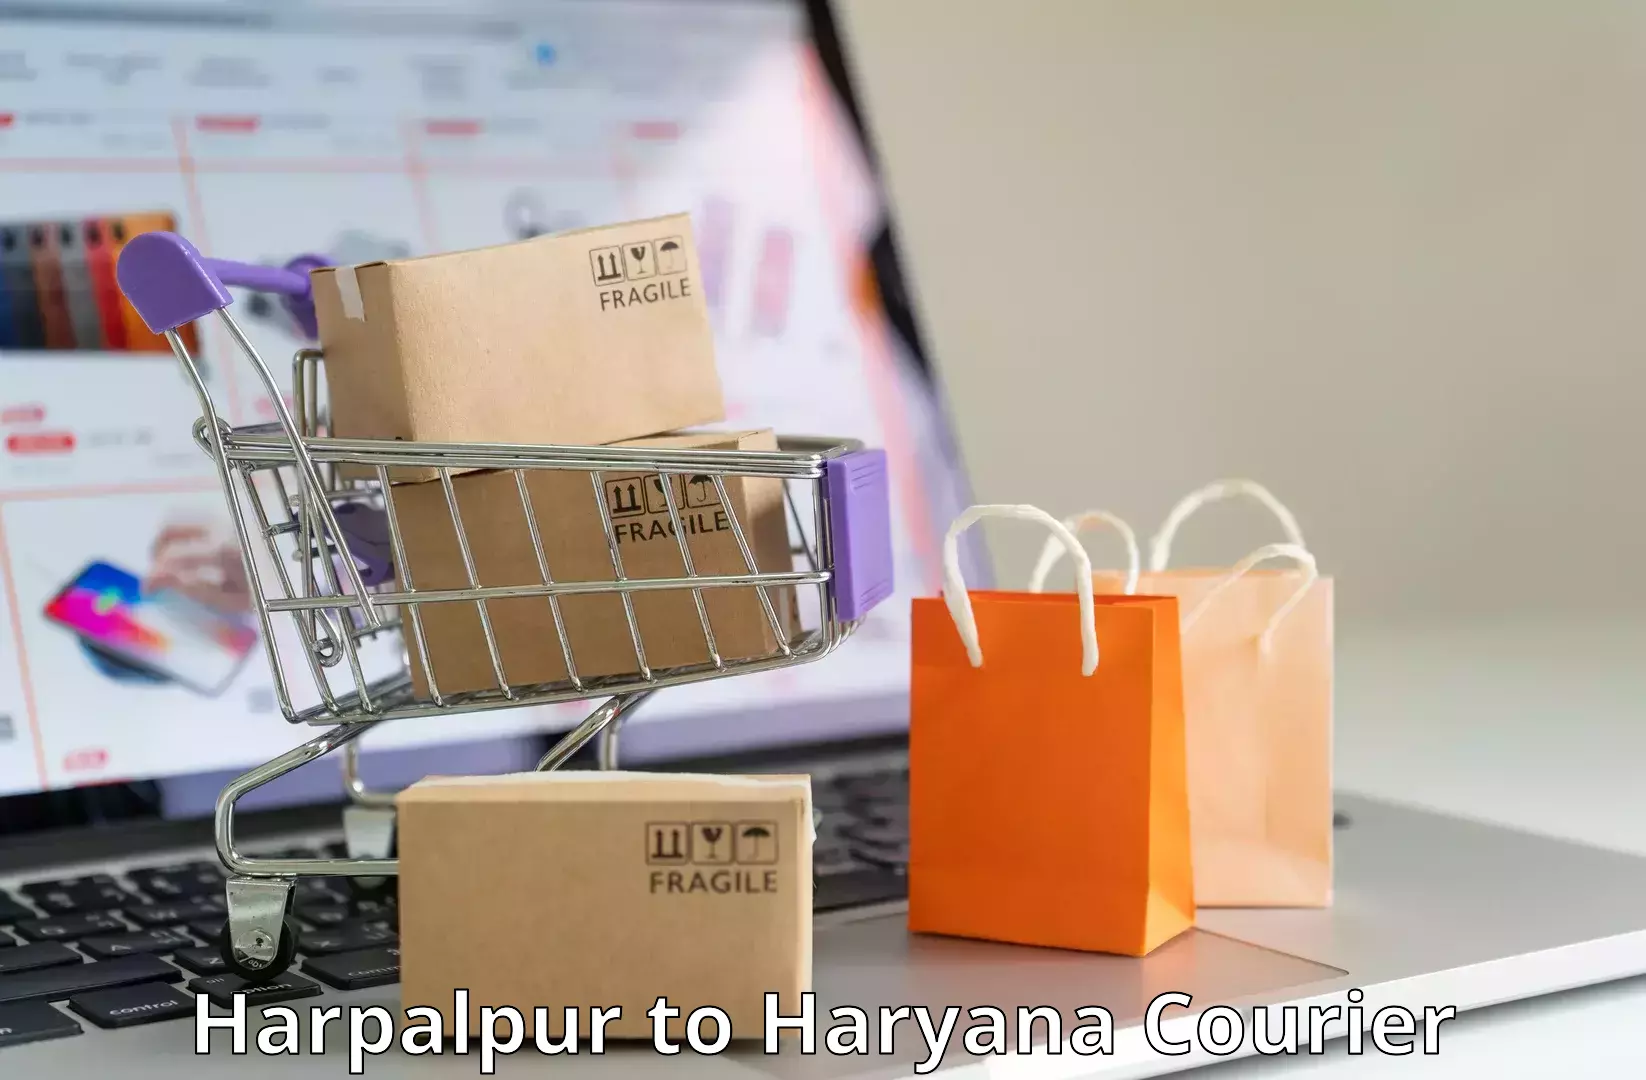 Customized shipping options in Harpalpur to Gurugram